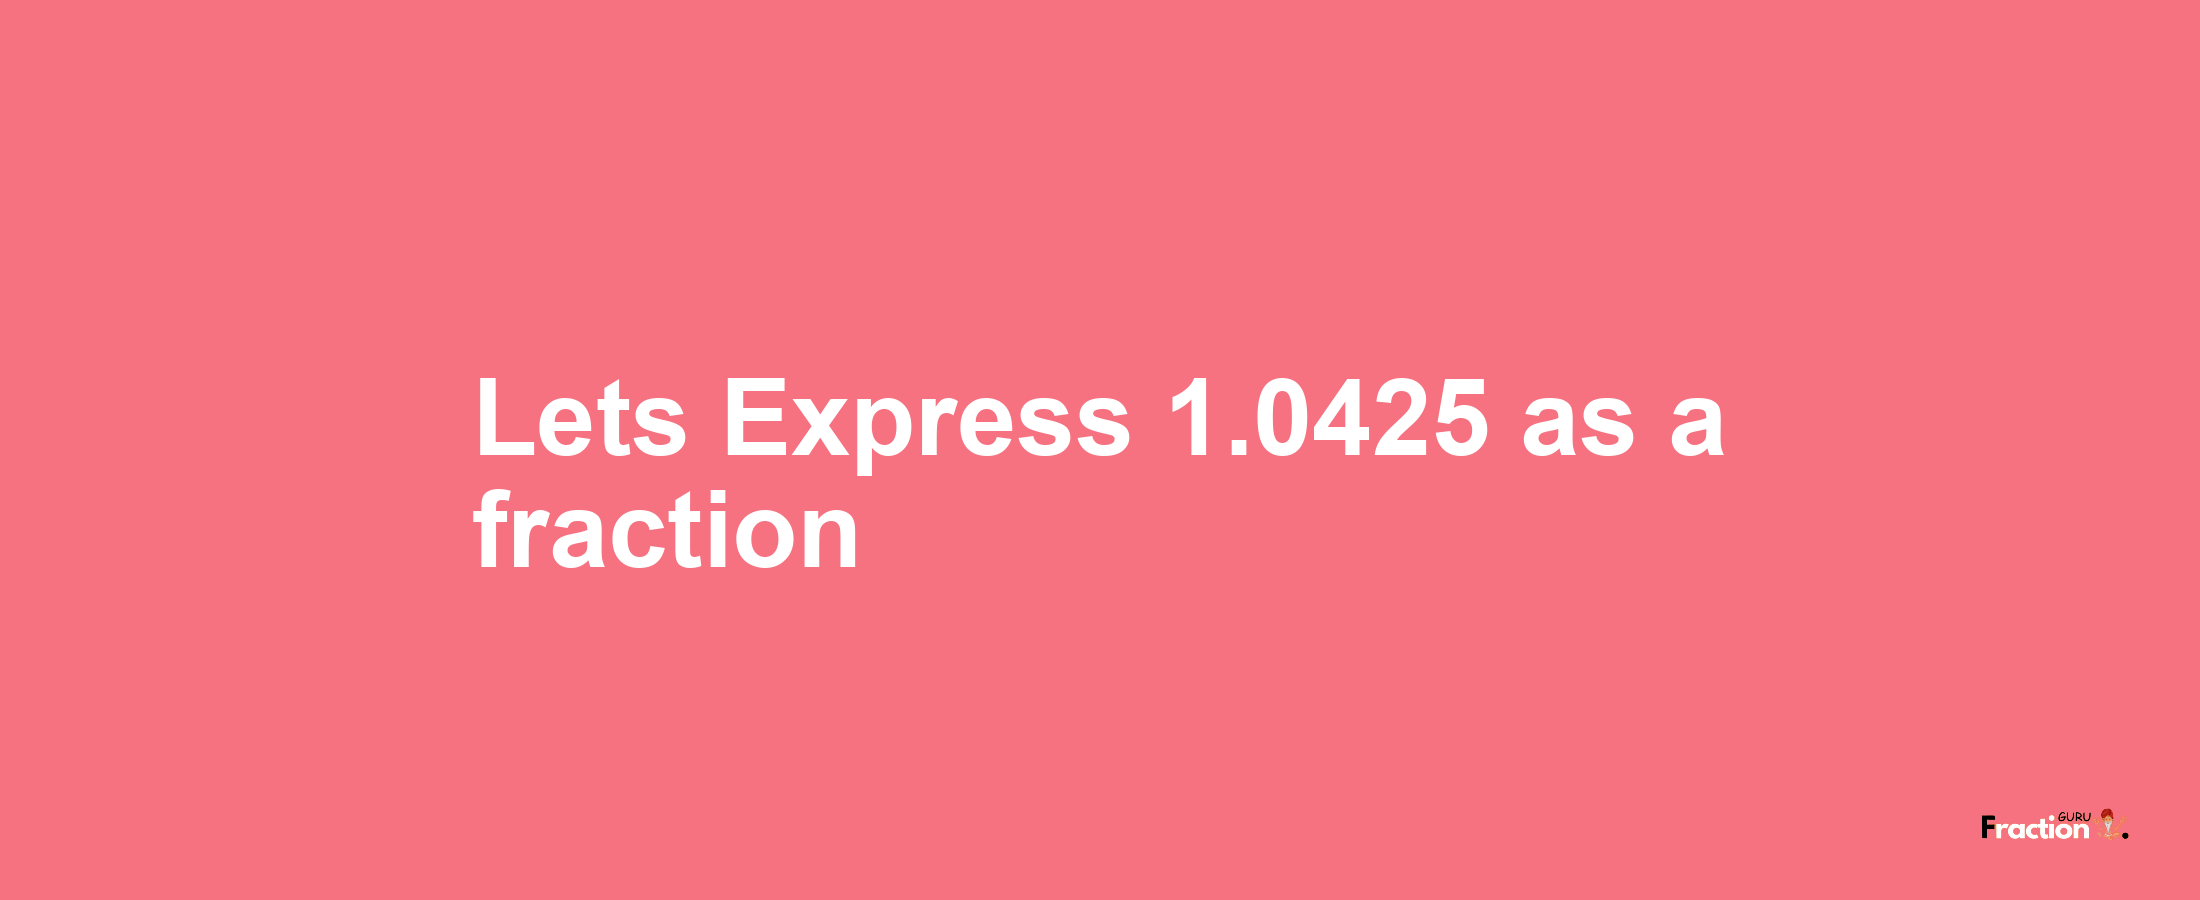 Lets Express 1.0425 as afraction